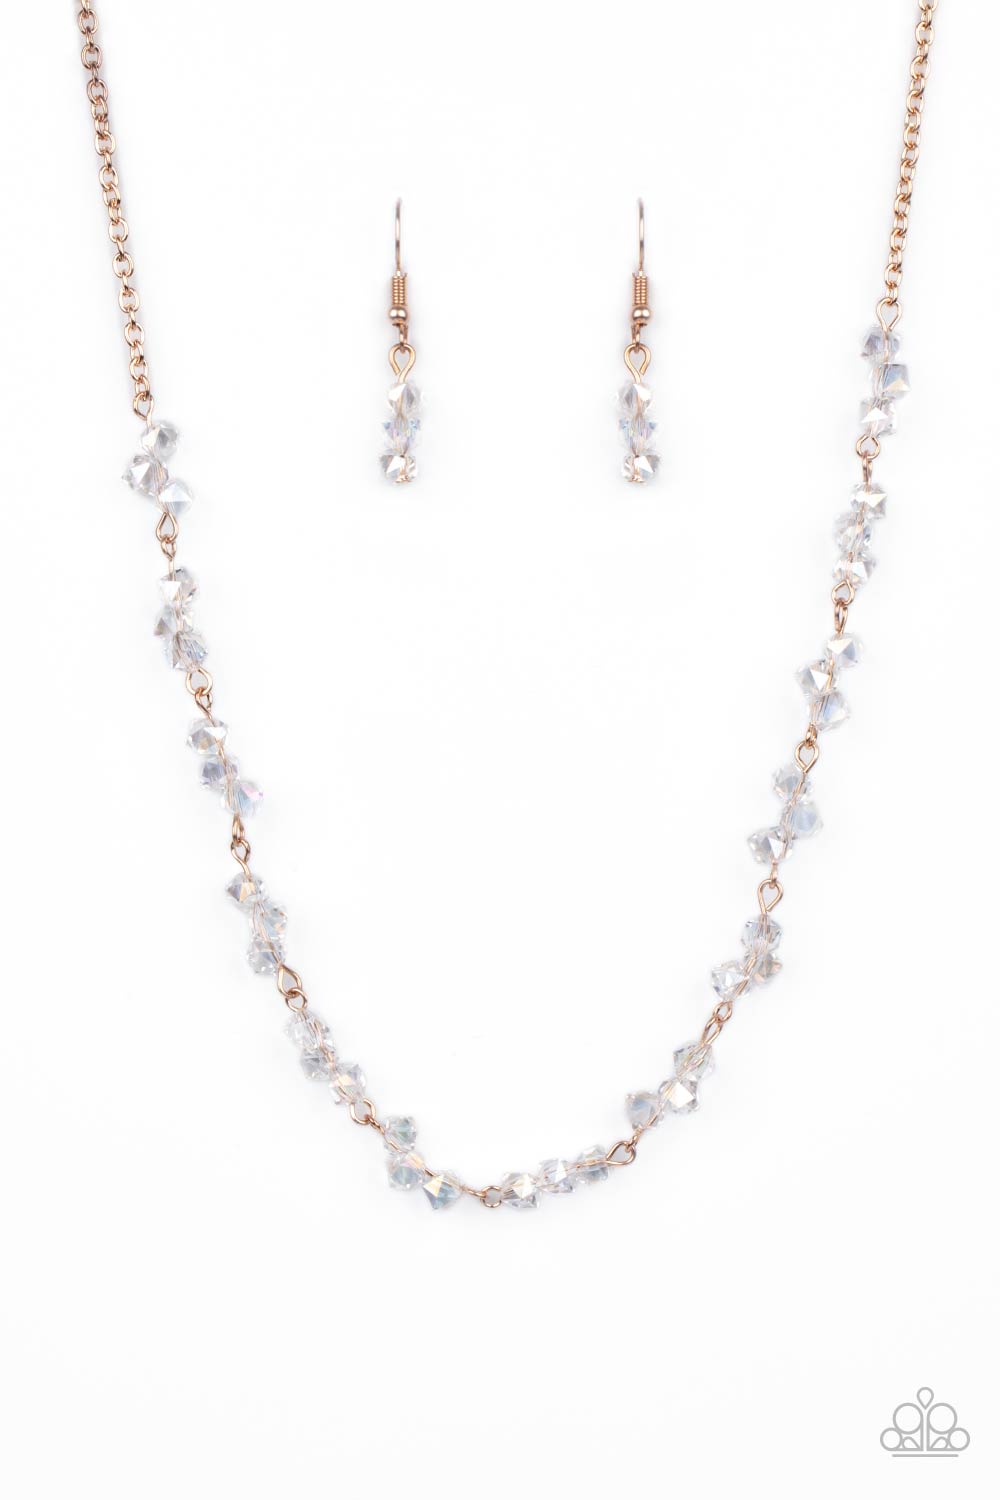 Incredibly Iridescent Rose Gold Necklace - Paparazzi